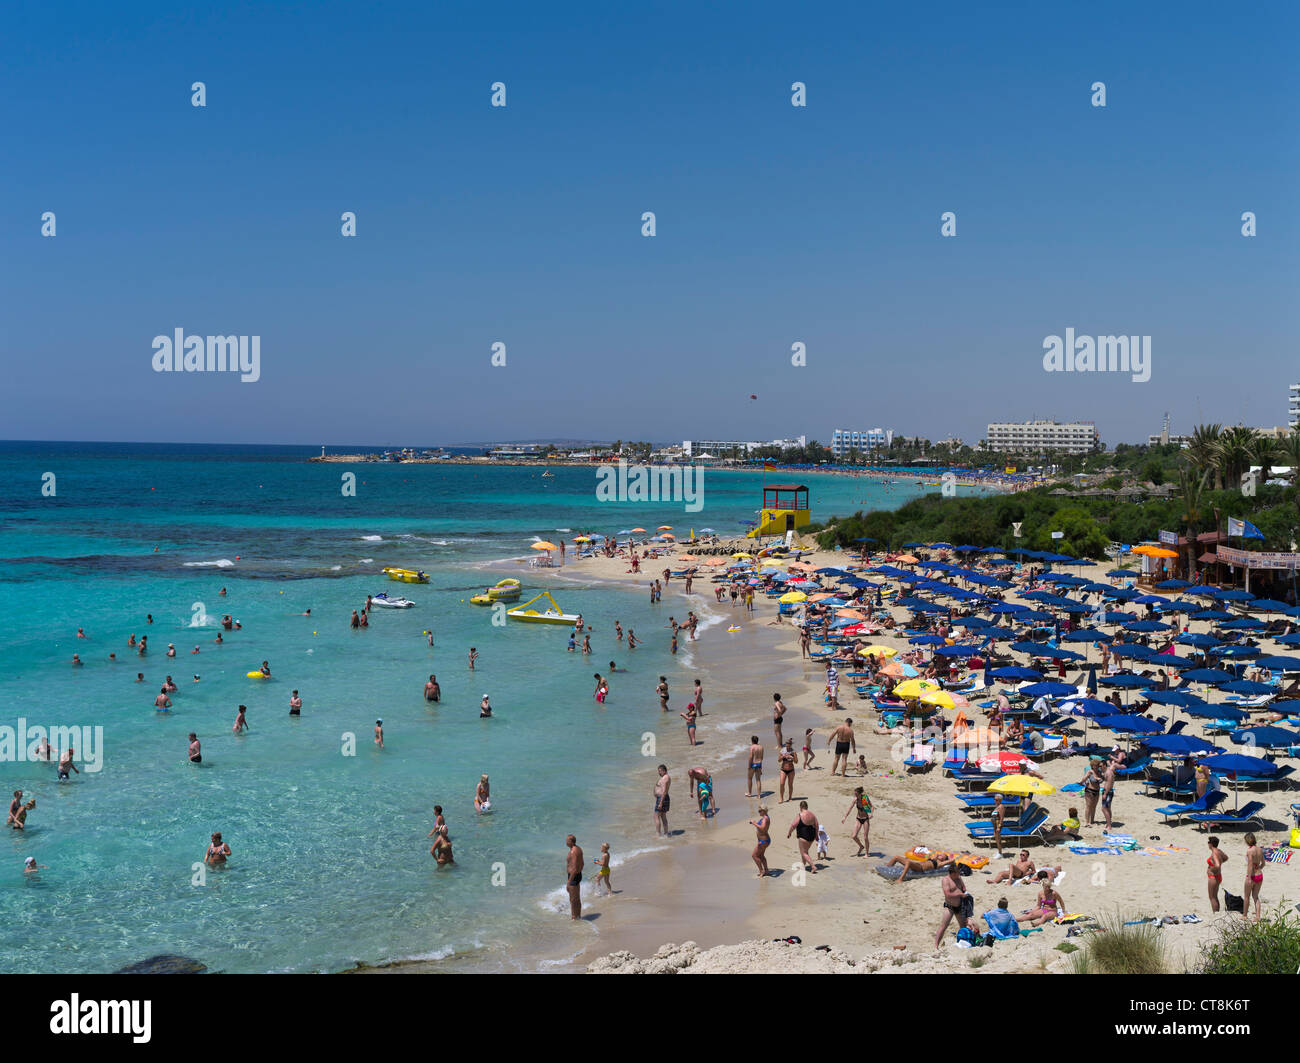 dh Grecian Bay beach AYIA NAPA BEACHES CYPRUS GREECE Sunbathers and swimmers hotels holiday resort holidaymakers in sun Stock Photo